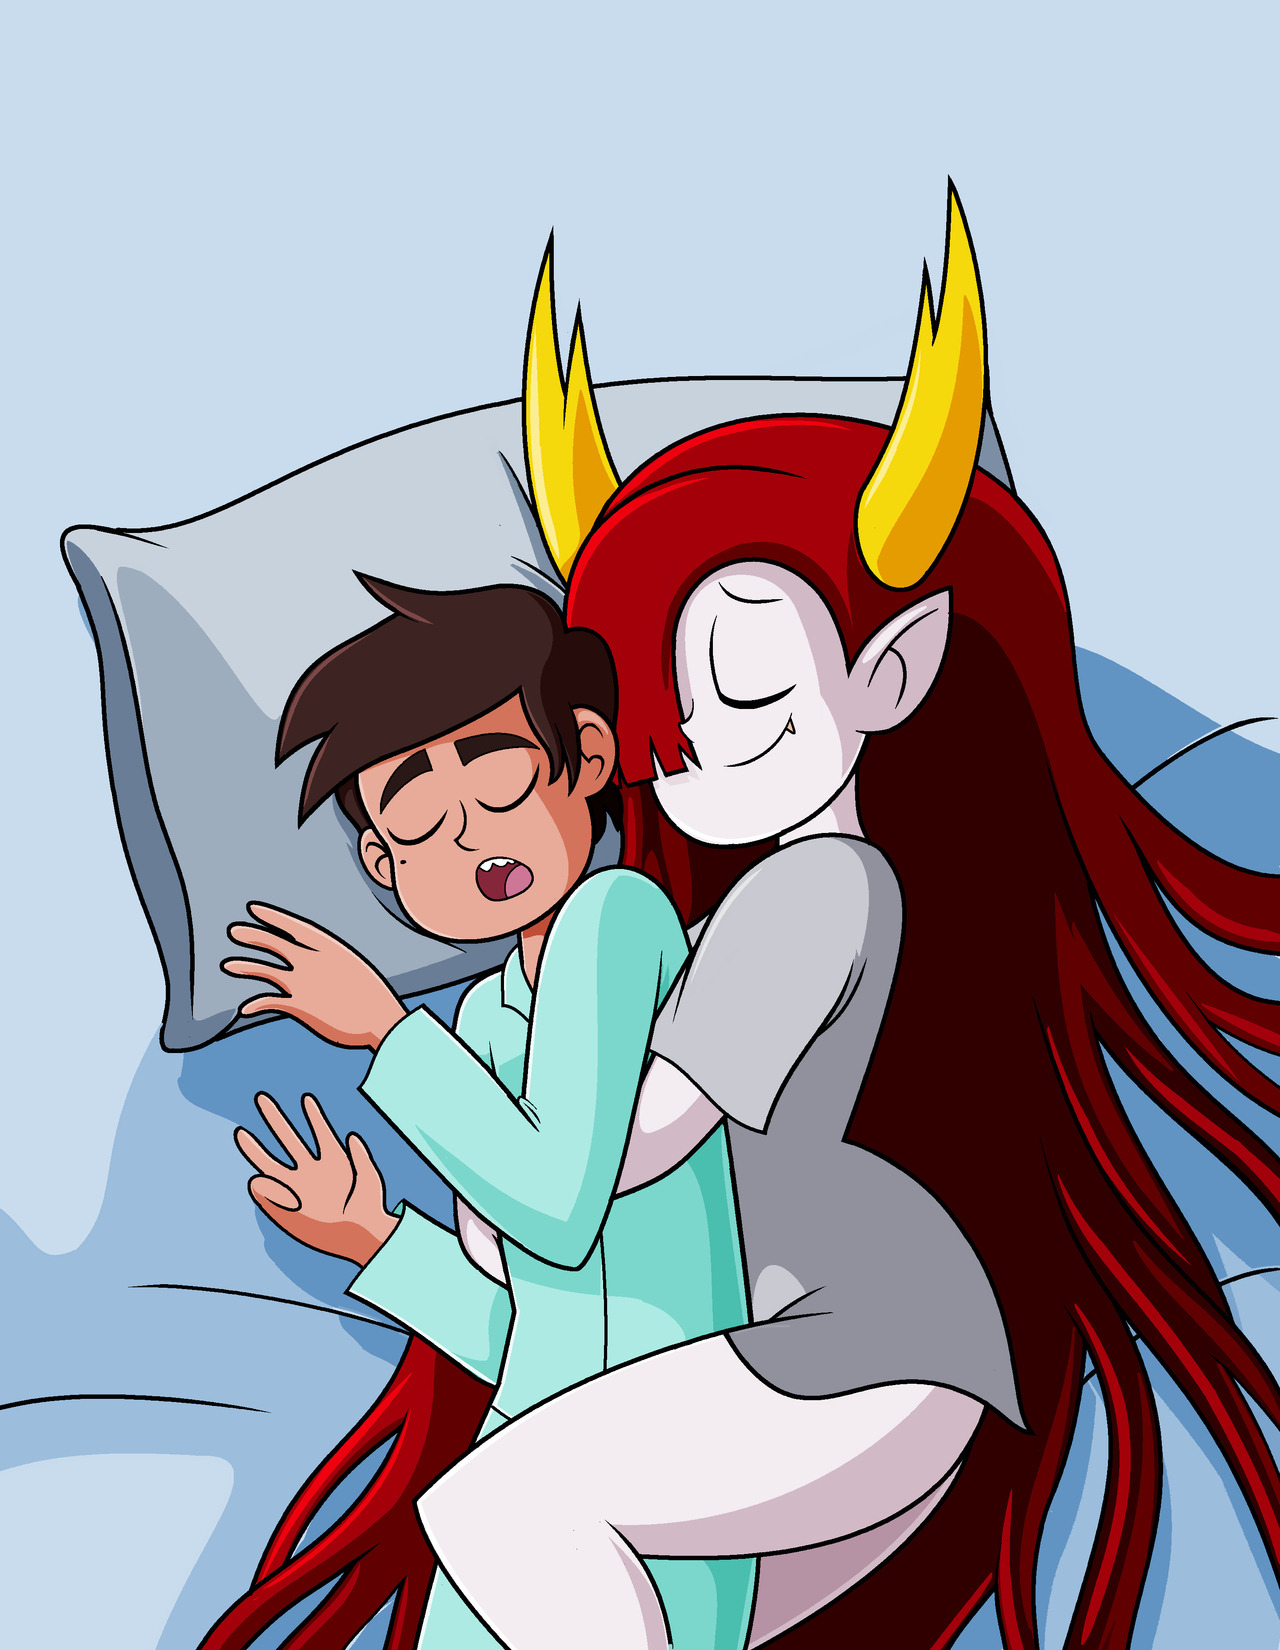 pills-on-a-little-cup:  Hekapoo cuddling with Marco I love these 2, they look cute